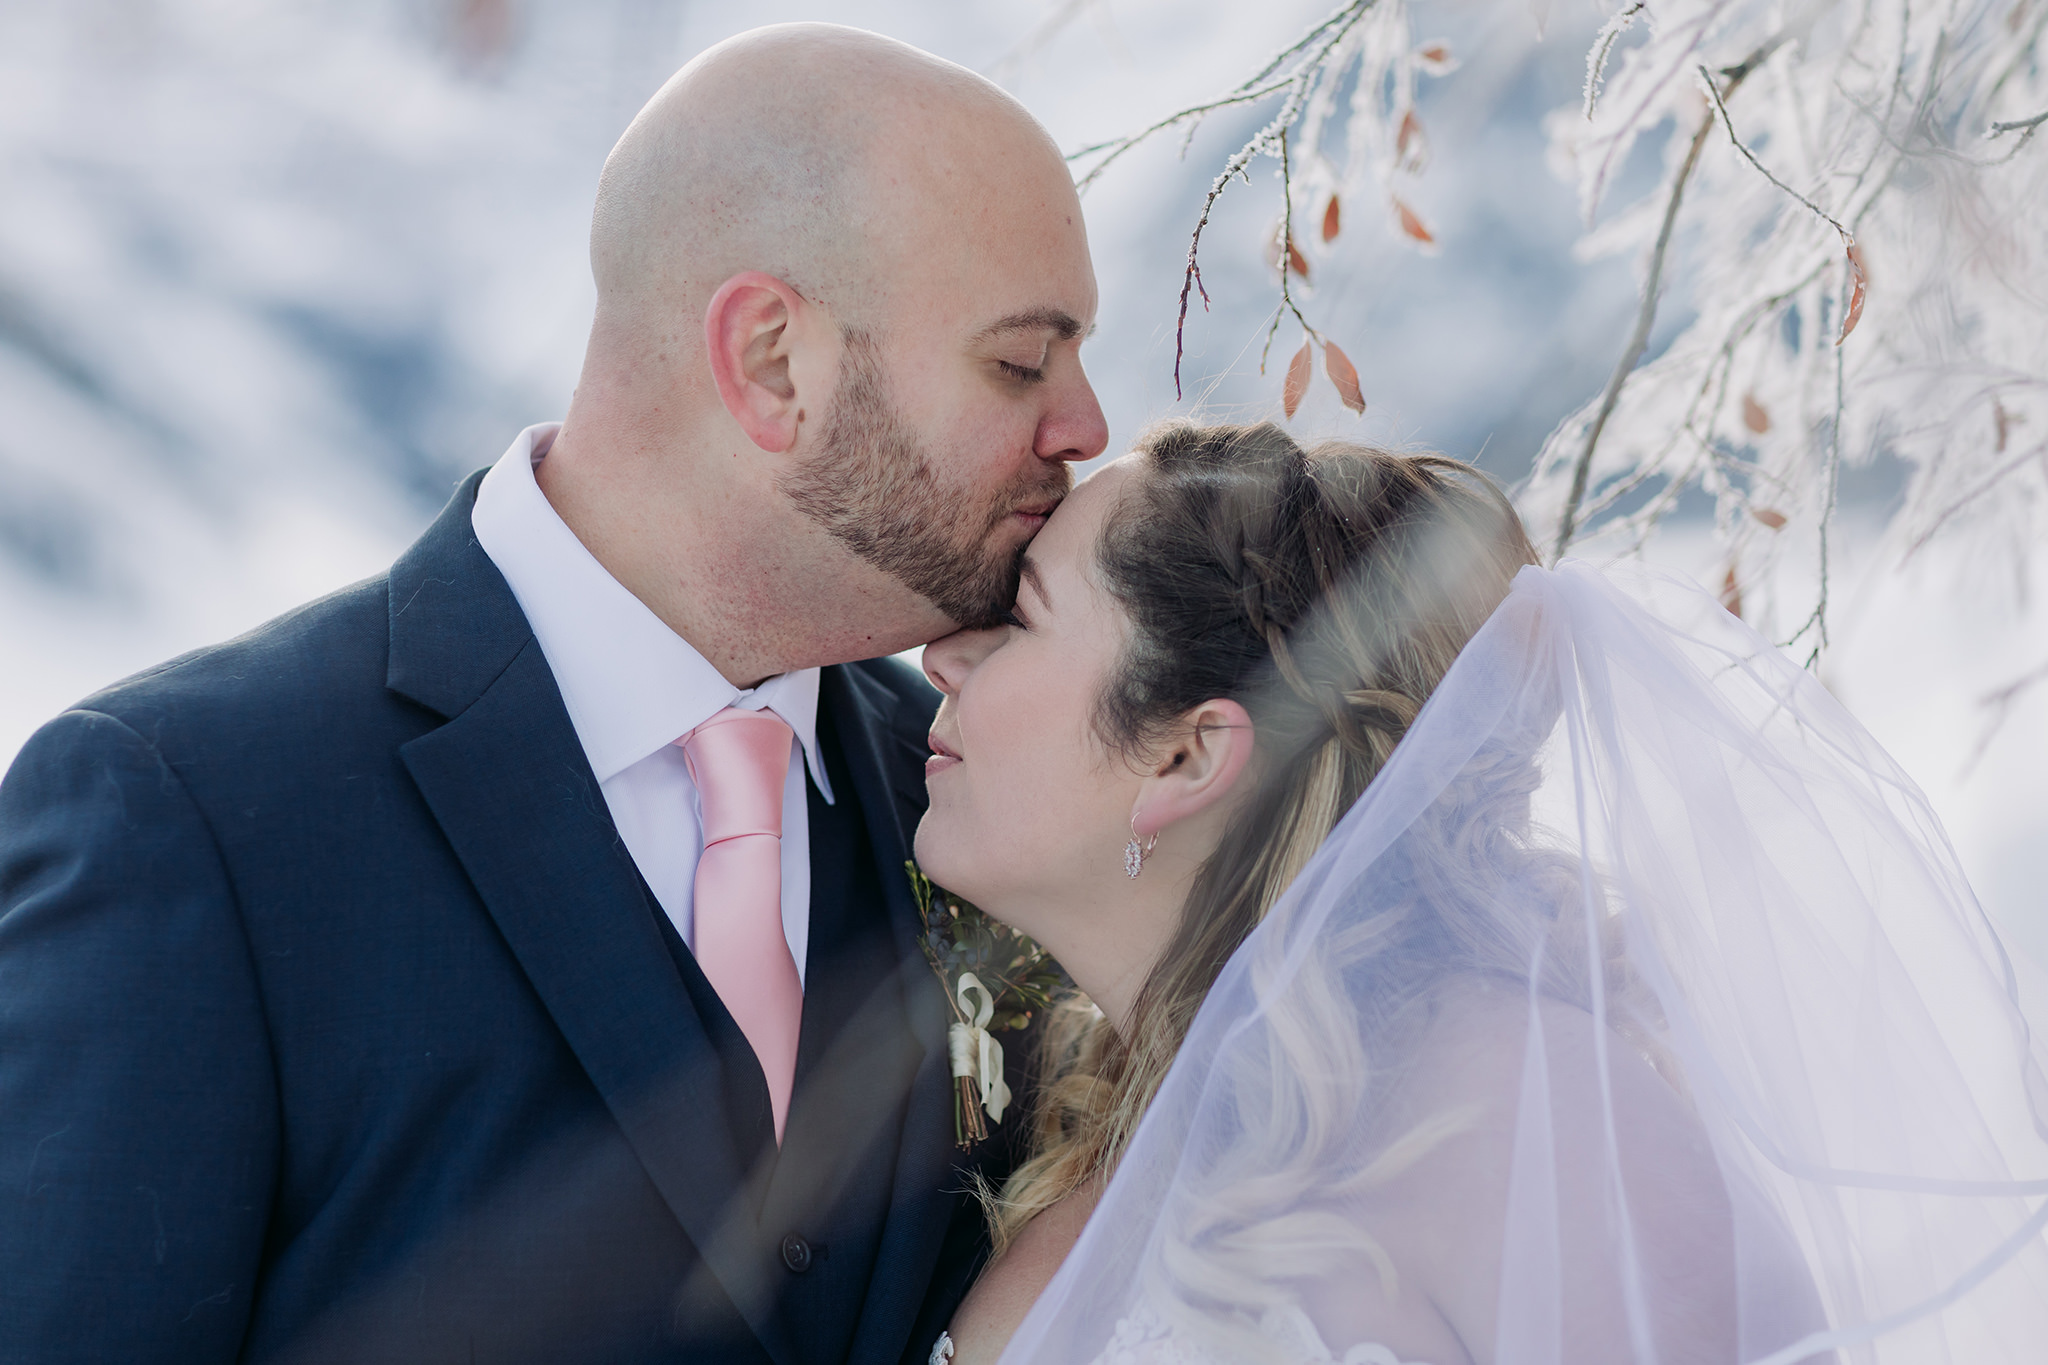 Lake Louise winter elopement on frozen Lake Louise with Bride in pink wedding dress in winter wonderland Super snowy elopement wedding photographed by ENV Photography Bow Valley Parkway